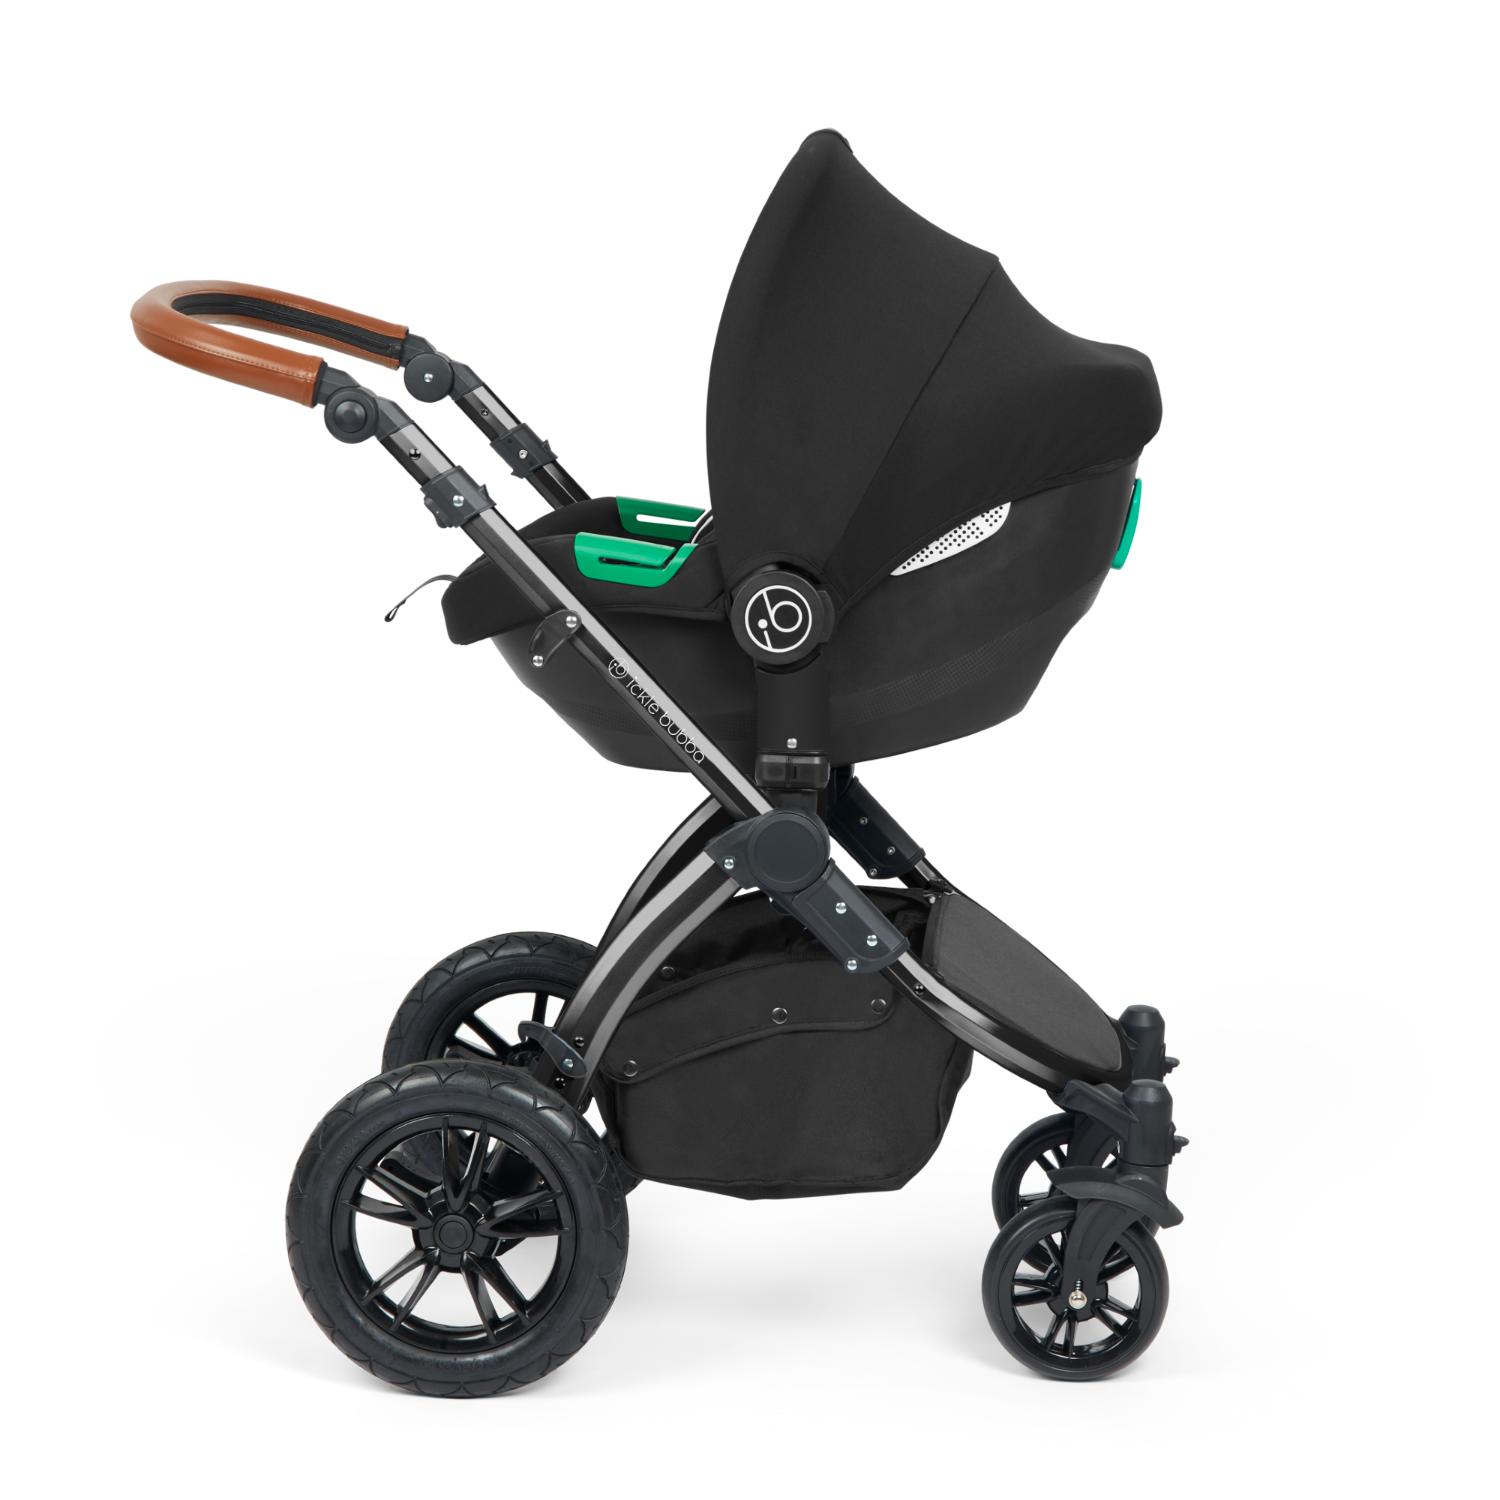 Ickle Bubba Stomp Luxe Pushchair with Cirrus i-Size car seat attached in Charcoal Grey colour with tan handle